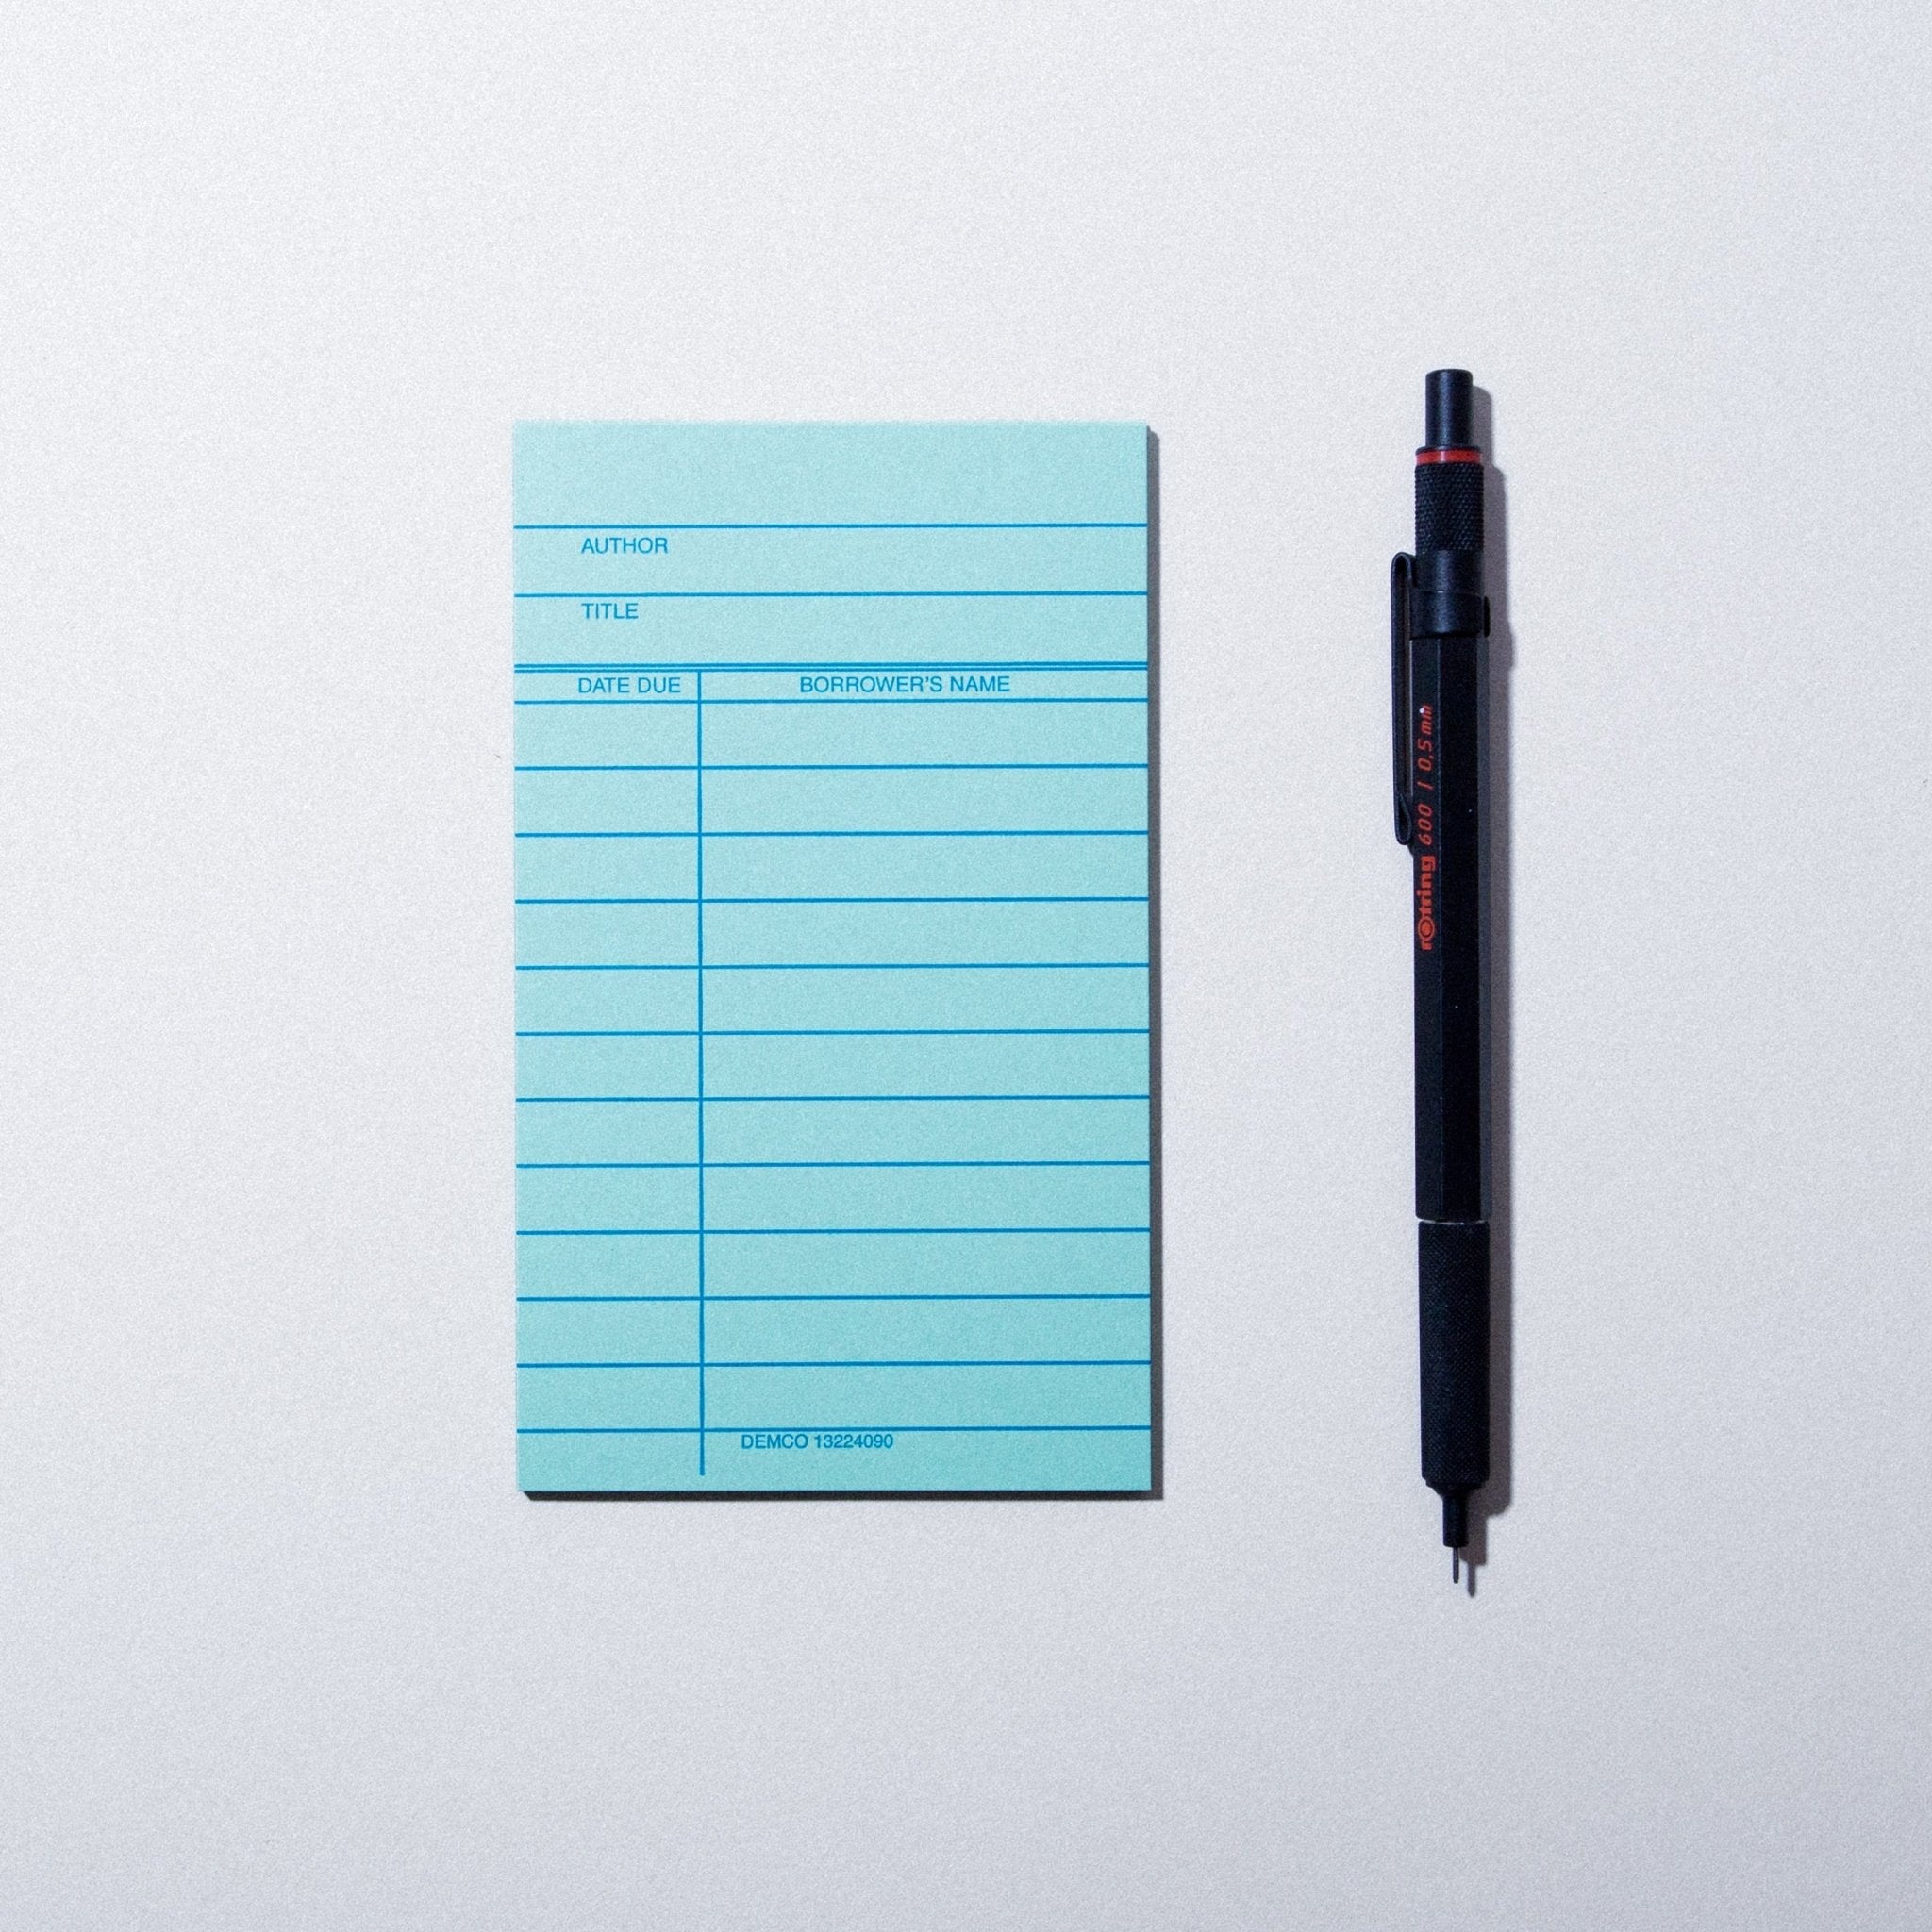 Library Card To Do Lists - Case Study